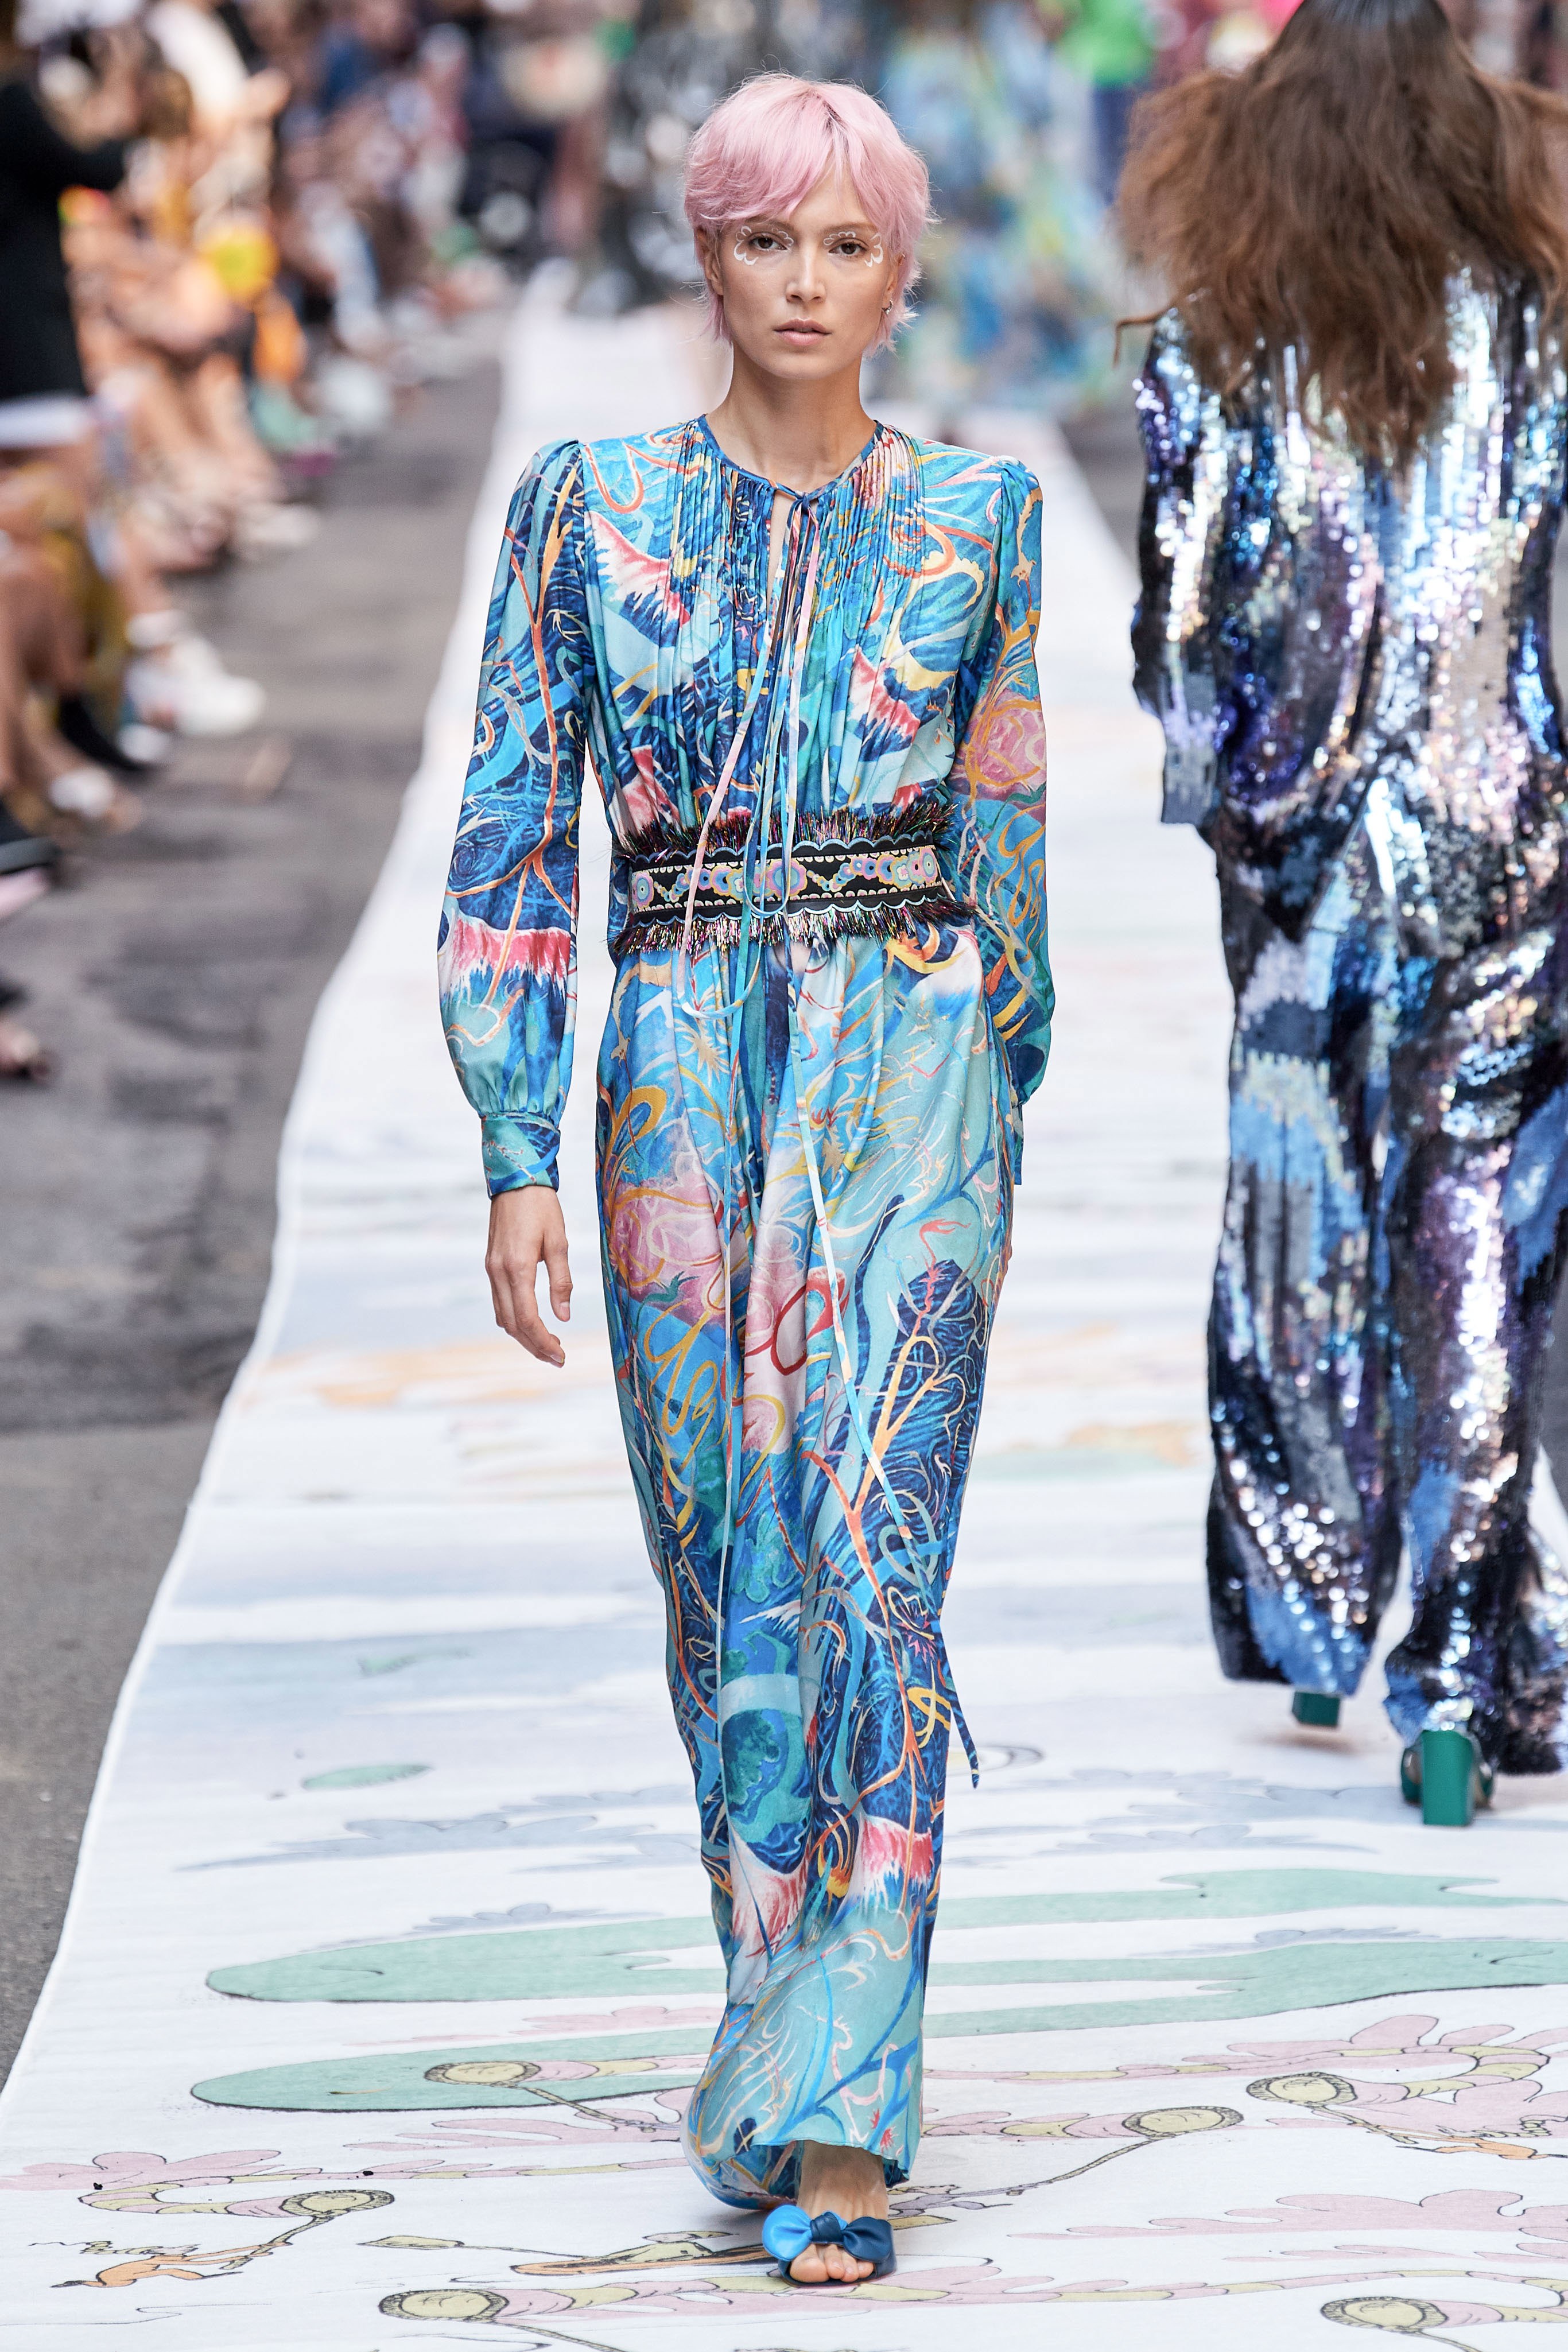 Cynthia Rowley Spring Summer 2020 SS2020 trends runway coverage Ready To Wear Vogue psychelique